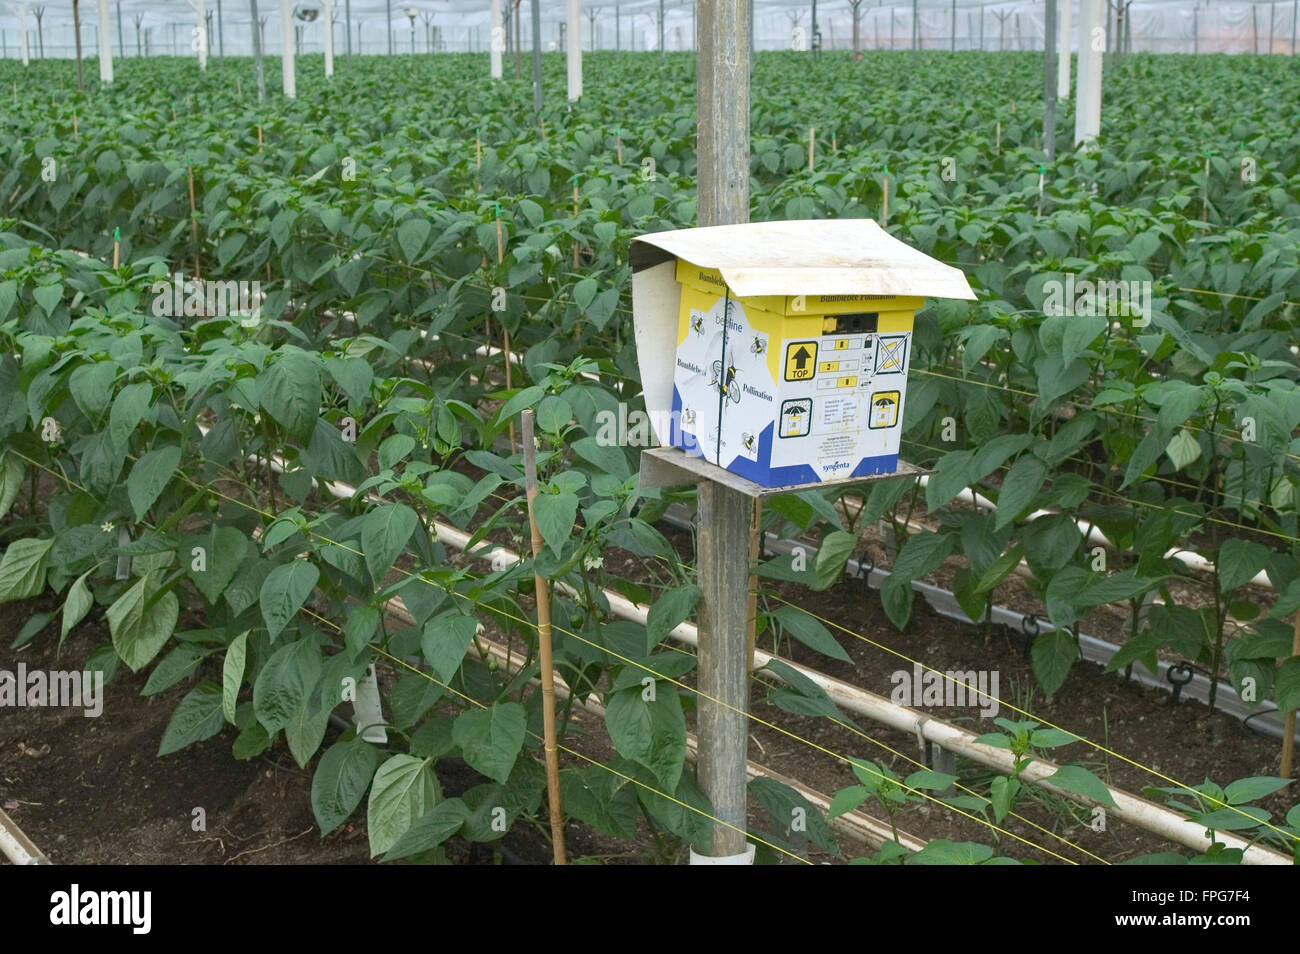 A commercial box supporting a colony of bumblebees, Bombus spp., for pollinating Capsicum peppers in a polytunnel Stock Photo